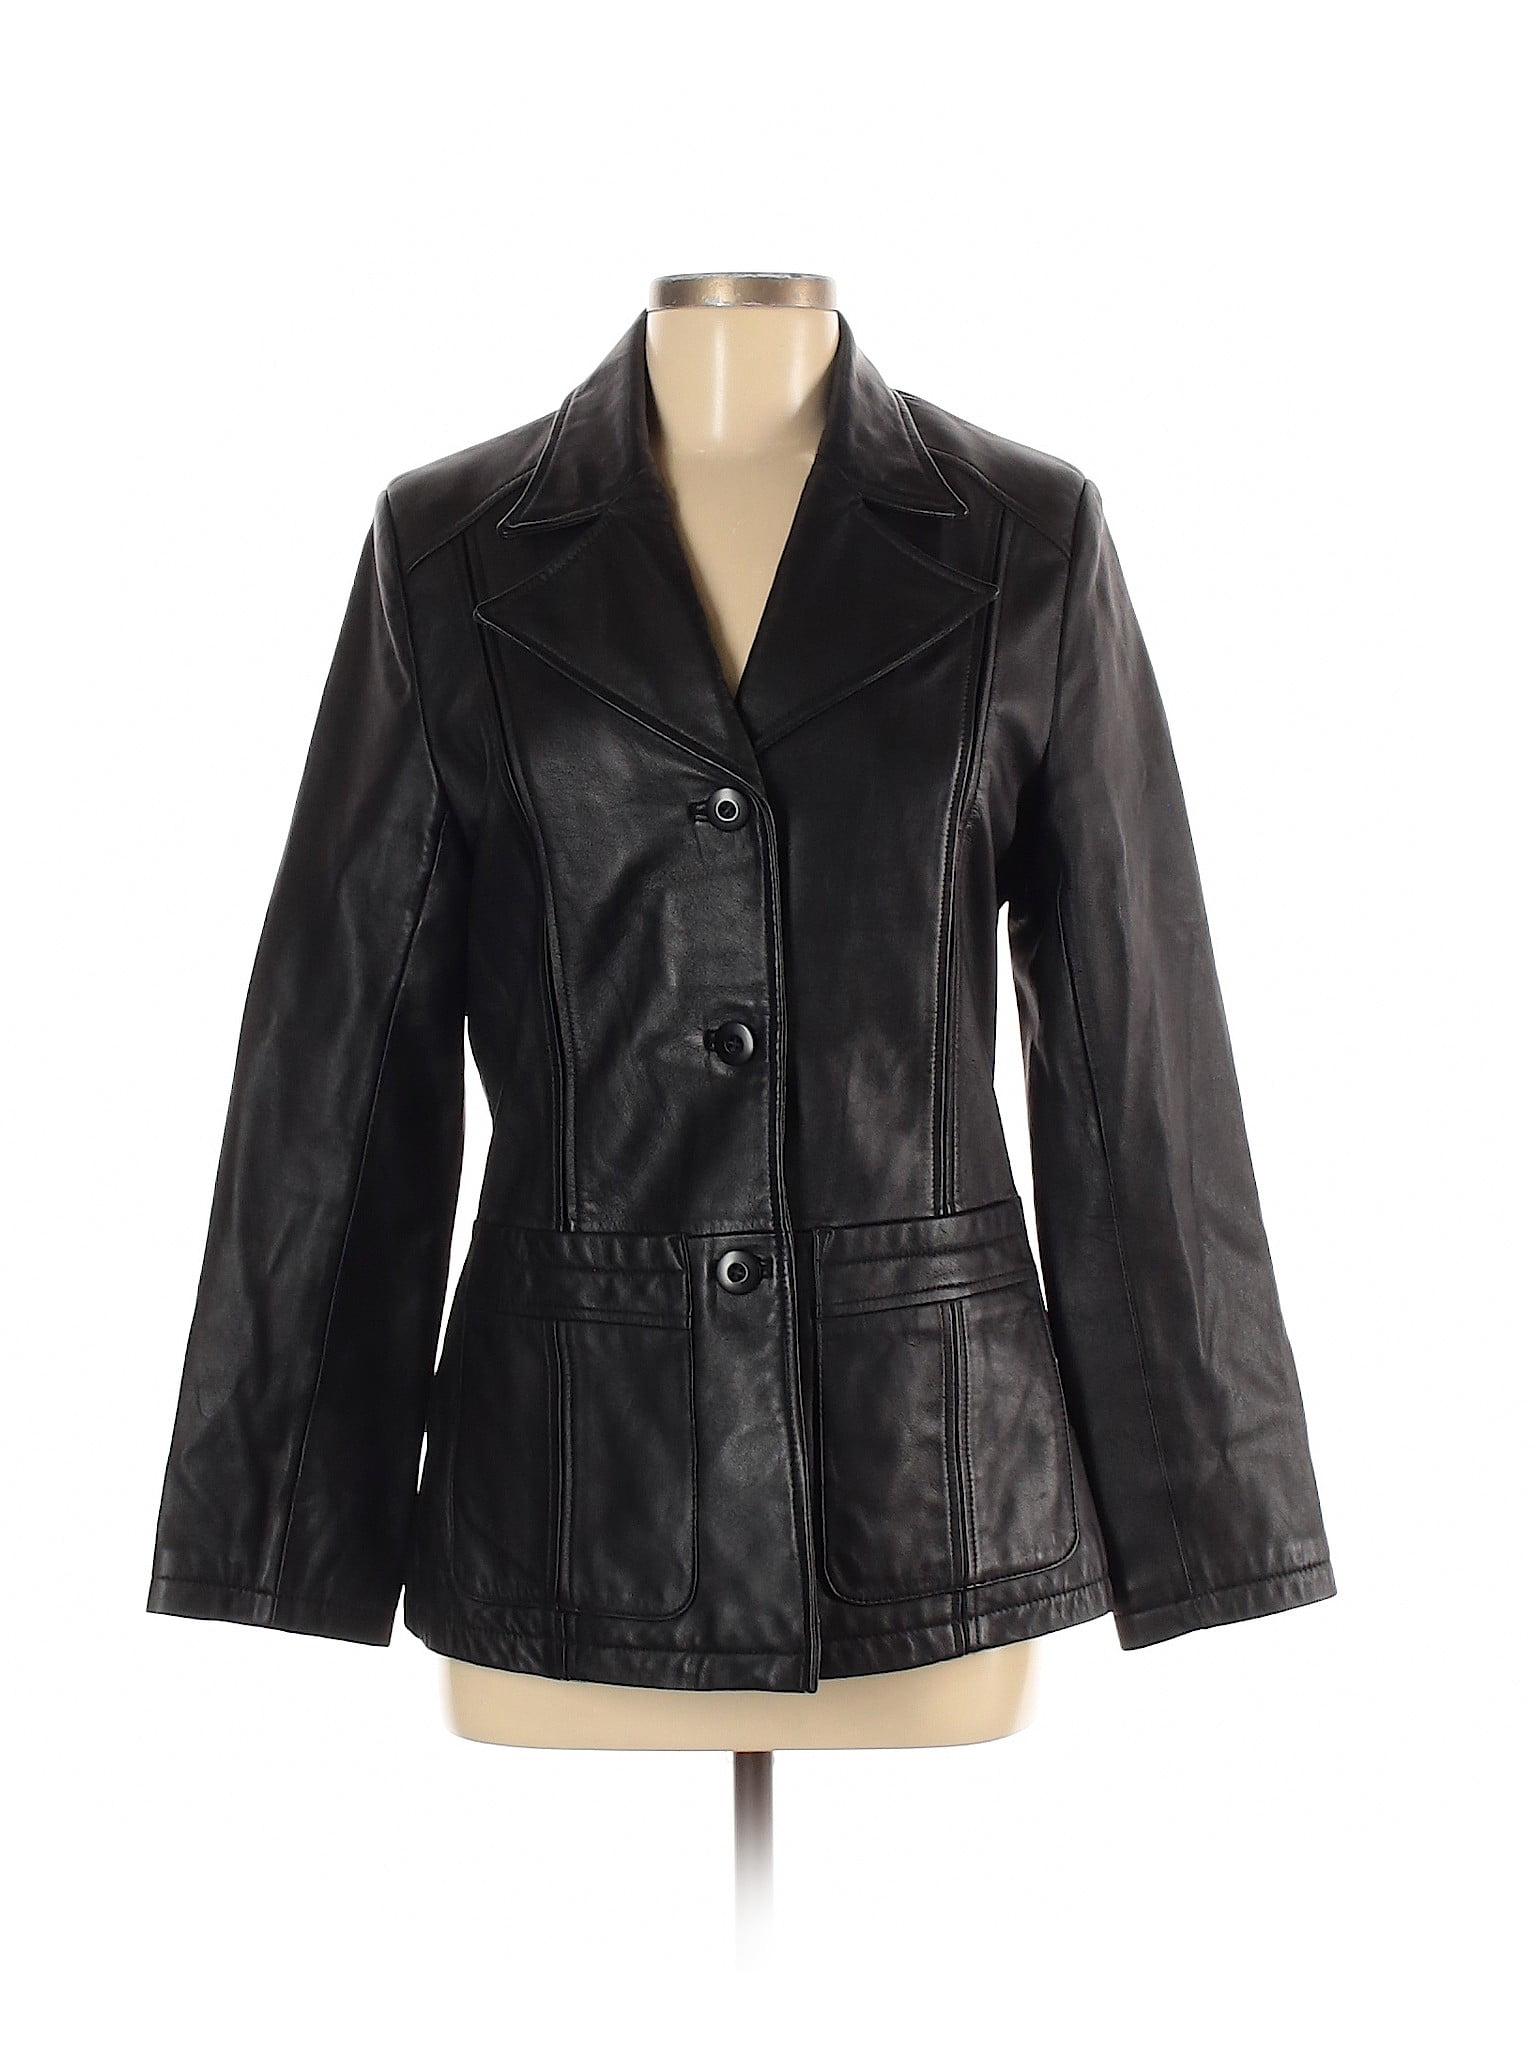 Wilsons Leather - Pre-Owned Wilsons Leather Women's Size M Leather